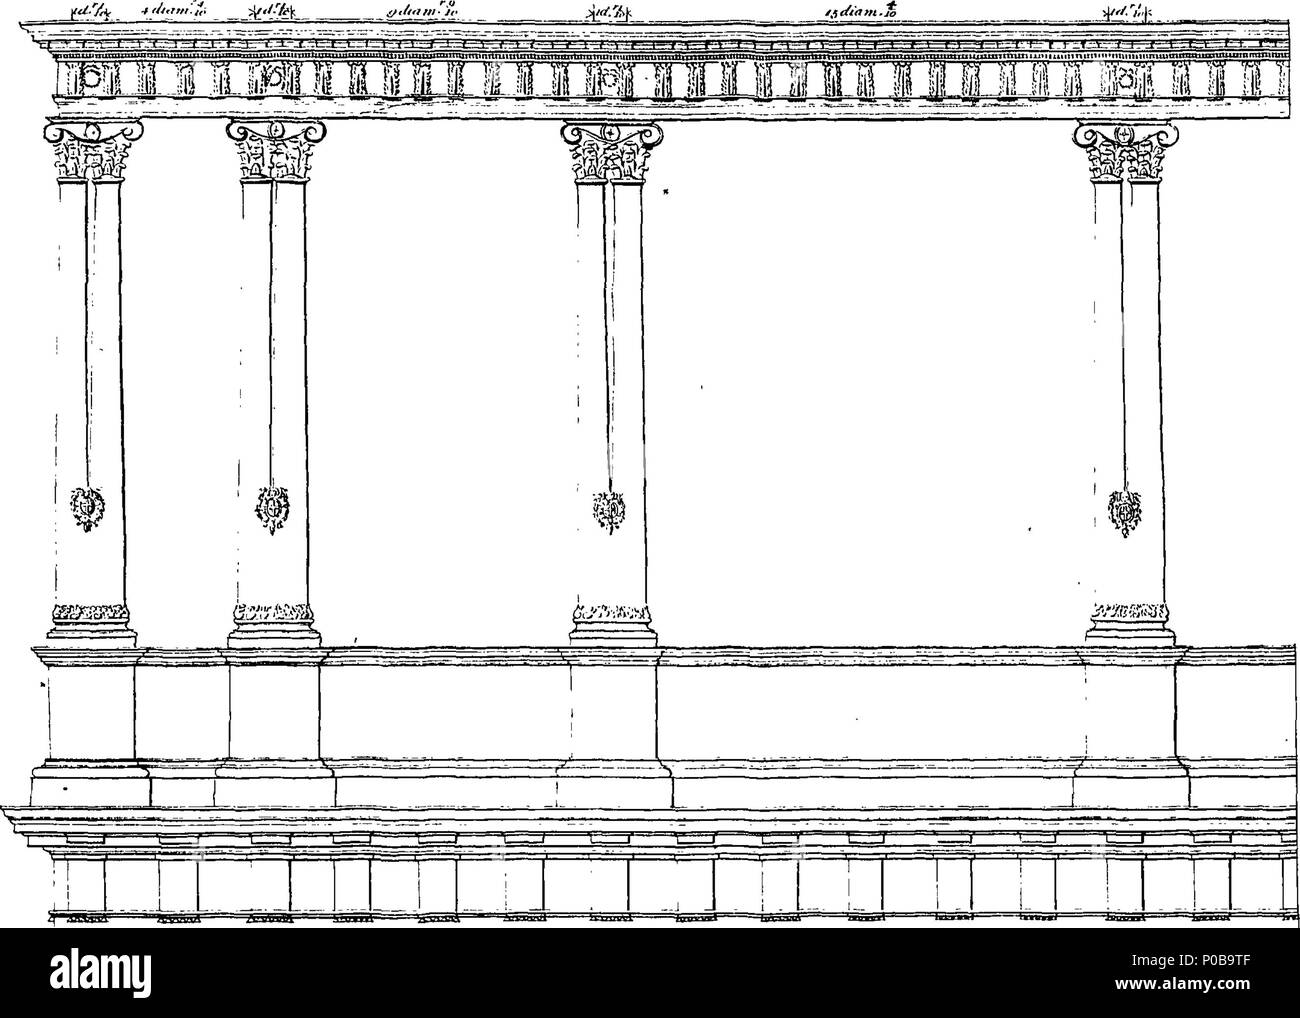 . English: Fleuron from book: A proposition for a new order in architecture, with rules for drawing the several parts. Shewing The Intercoluminations, Arcades, Windows and Niches of this Composition; and how it is adapted to assemble with the Grecian and Roman Orders: Also the Manner of placing it over the Doric, Ionic, Corinthian and Composite Orders. Shewing, likewise, how Columns of this Composition may be doubled for the Support of the Angle of a Building (as Palladio has doubled those of the Doric Order on the projecting Angle in the Front of the Palace of Count Valerio at Vicenza, where  Stock Photo